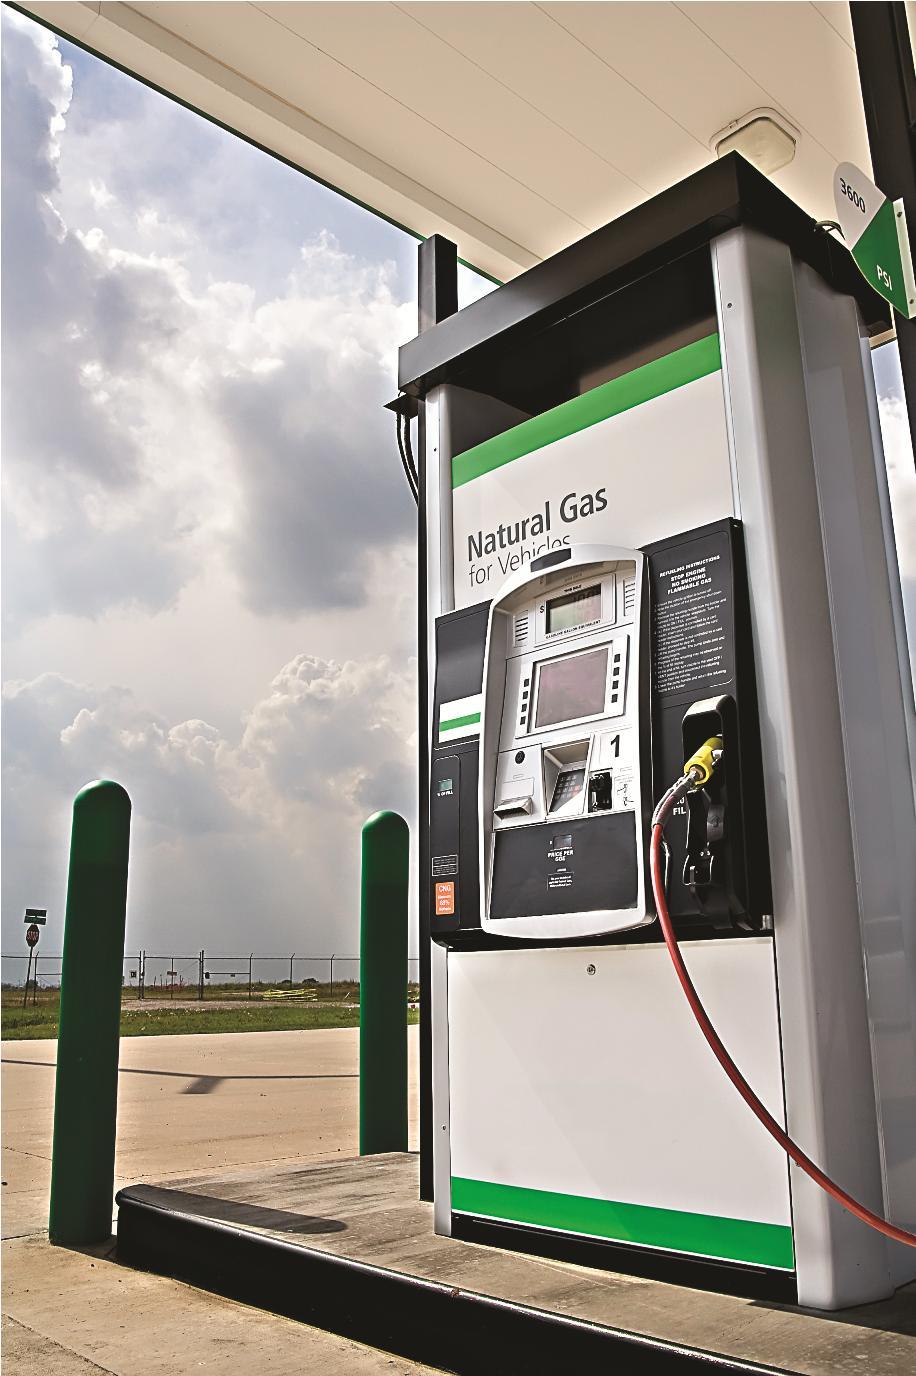 Natural Gas: Clean, Domestic, Secure, Affordable Energy for Transportation Greenhouse gas emissions 29% lower than comparable gasoline light-duty vehicles.